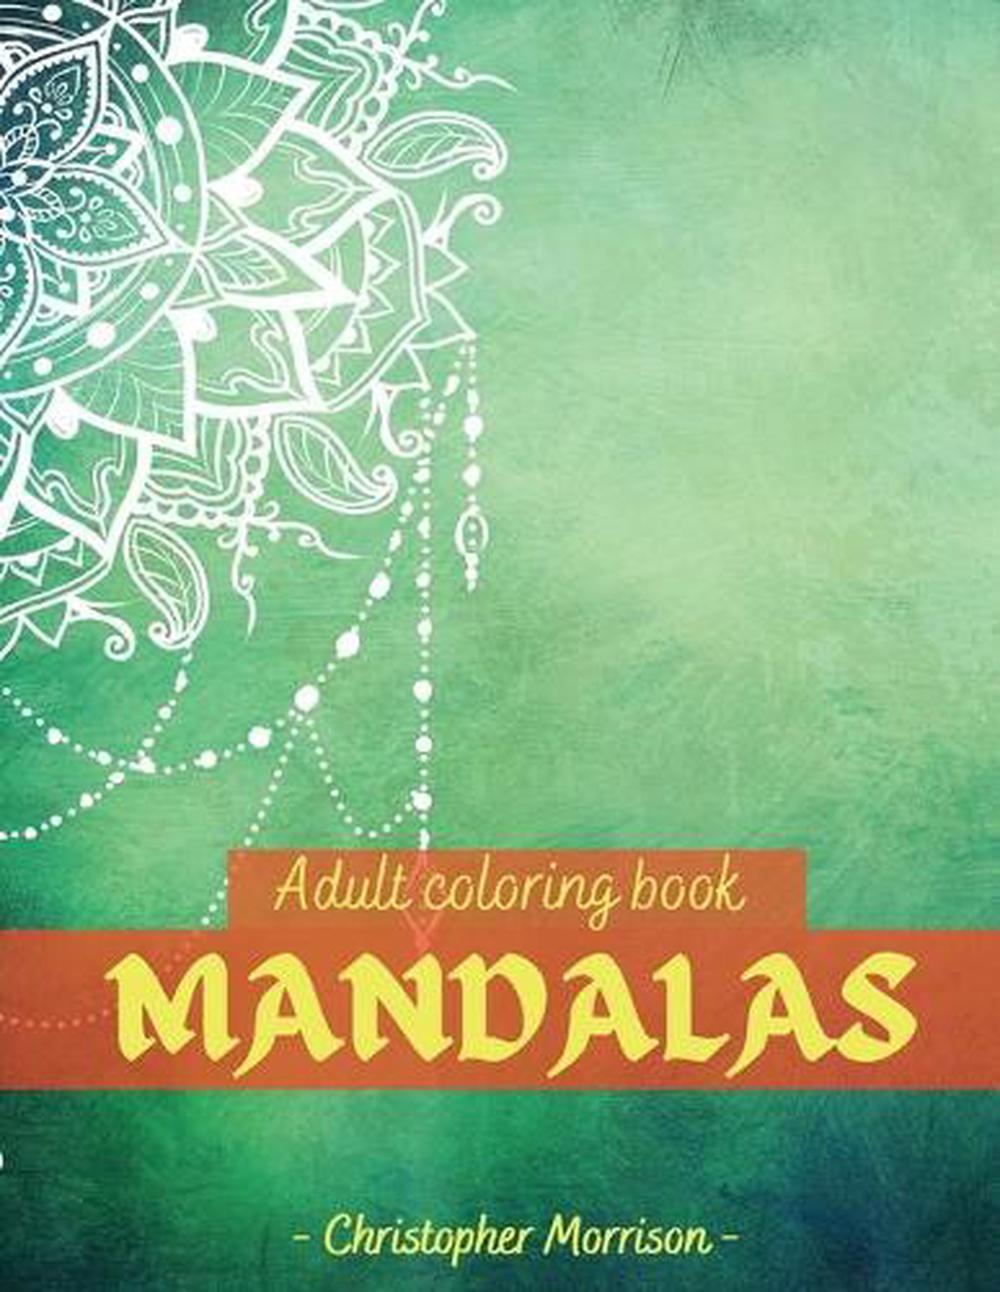 Download Mandalas Adult Coloring Book By Christopher Morrison Paperback 9781678083823 Buy Online At Moby The Great